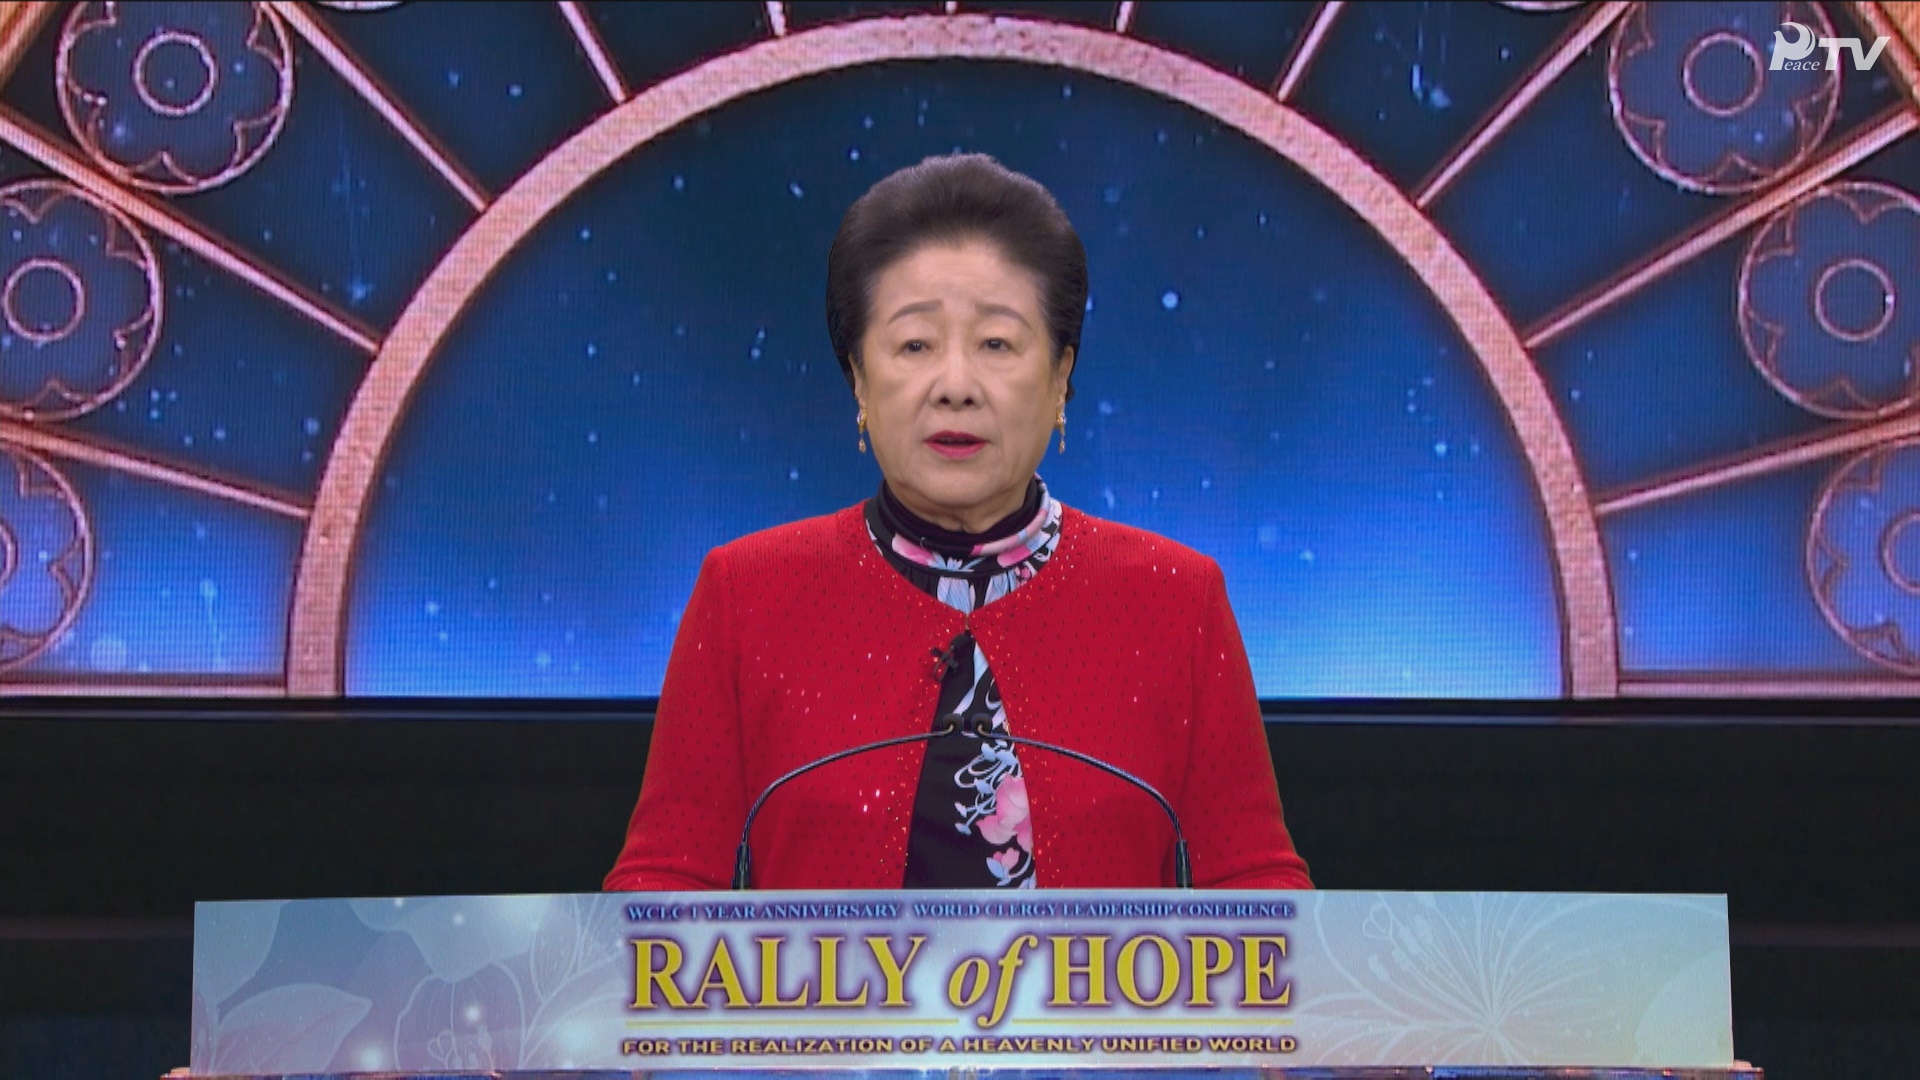 Rally of Hope to Celebrate the 1st Anniversary of the World Christian Leadership Conference and Support the Realization of a Heavenly Unified World (December 5, 2020)